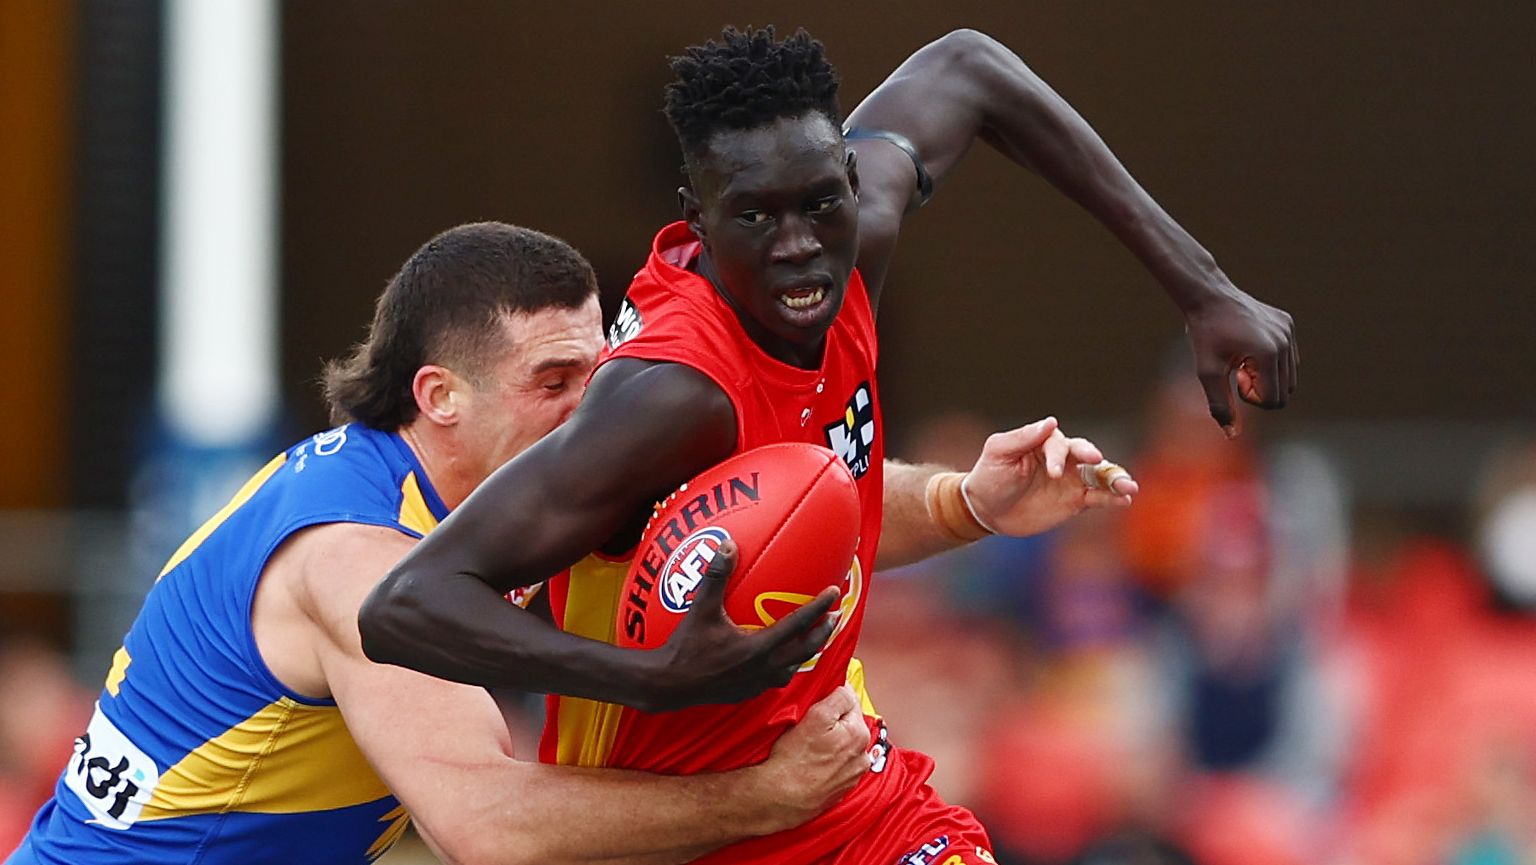 GOLD COAST, AUSTRALIA - JULY 31: Mac Andrew of the Suns in action during the round 20 AFL match between the Gold Coast Suns and the West Coast Eagles at Metricon Stadium on July 31, 2022 in Gold Coast, Australia. (Photo by Chris Hyde/Getty Images)